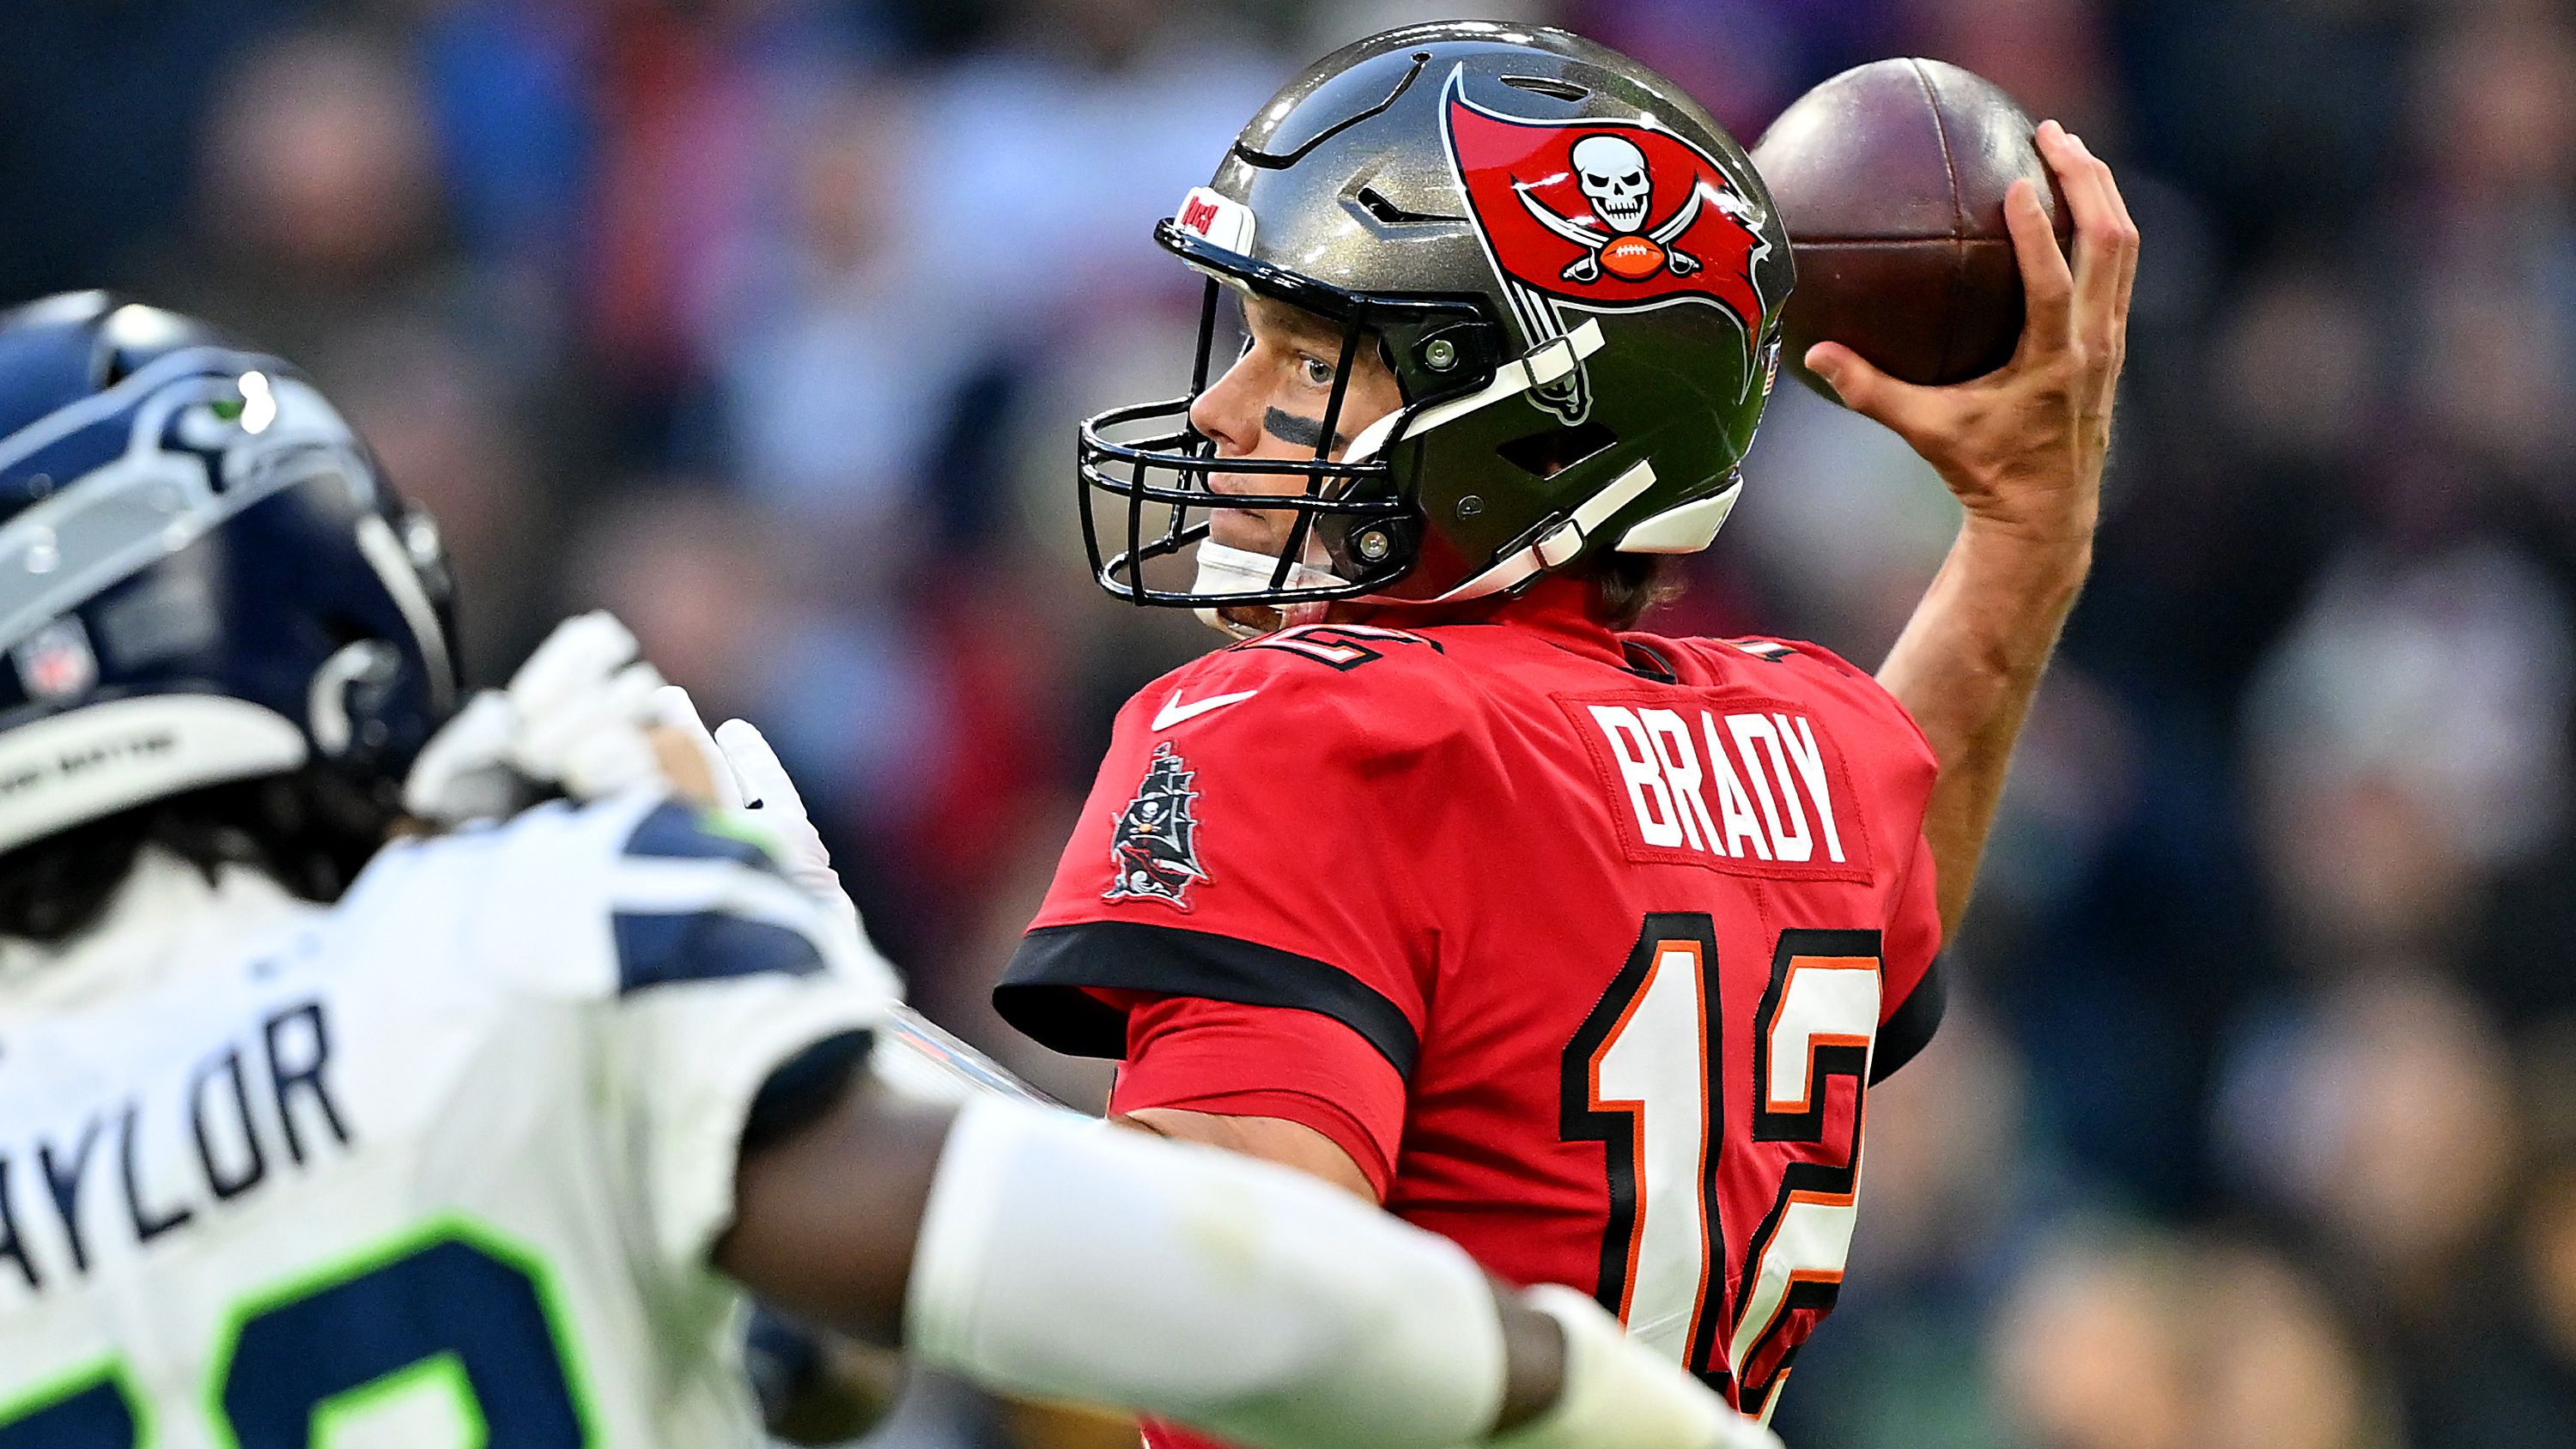 Tom Brady's Tampa Bay Buccaneers beat the Seattle Seahawks in historic Germany game